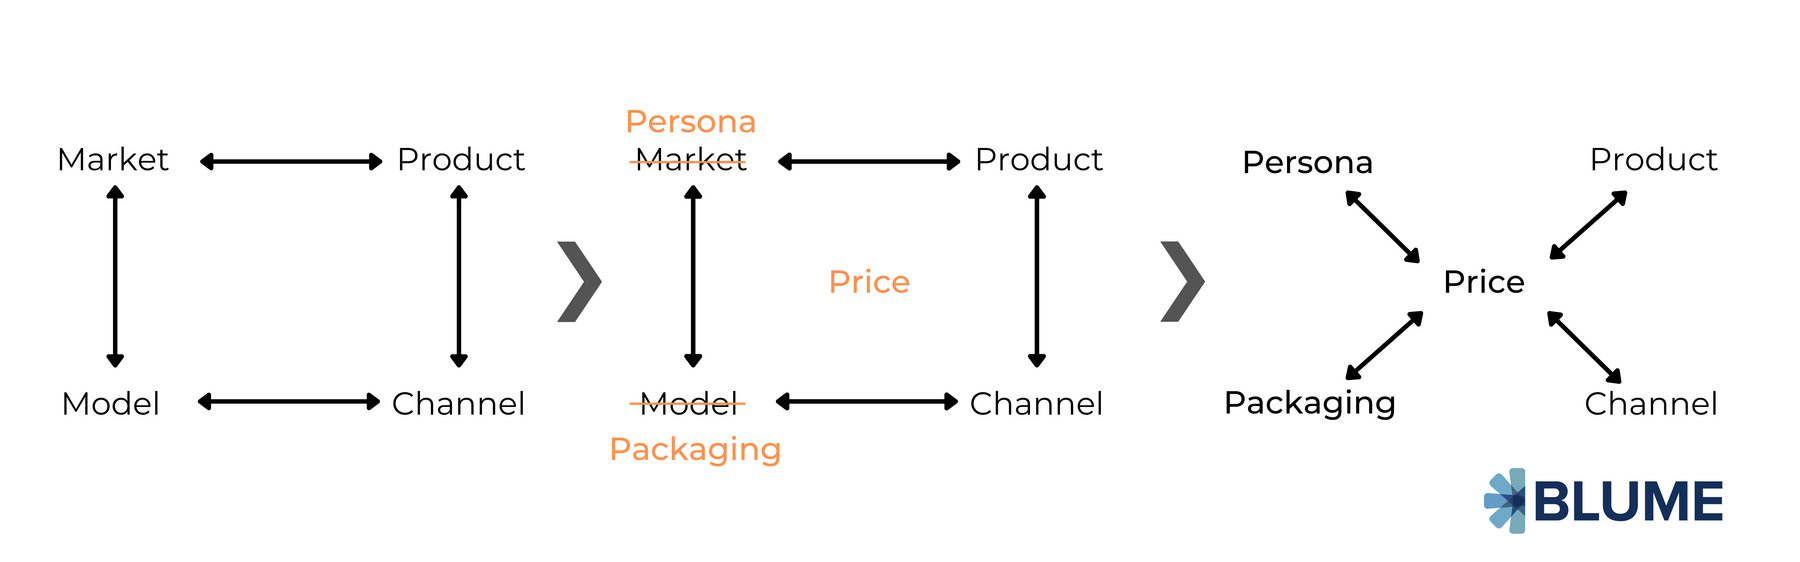 price-product-persona-packaging-channel&#x20;fit